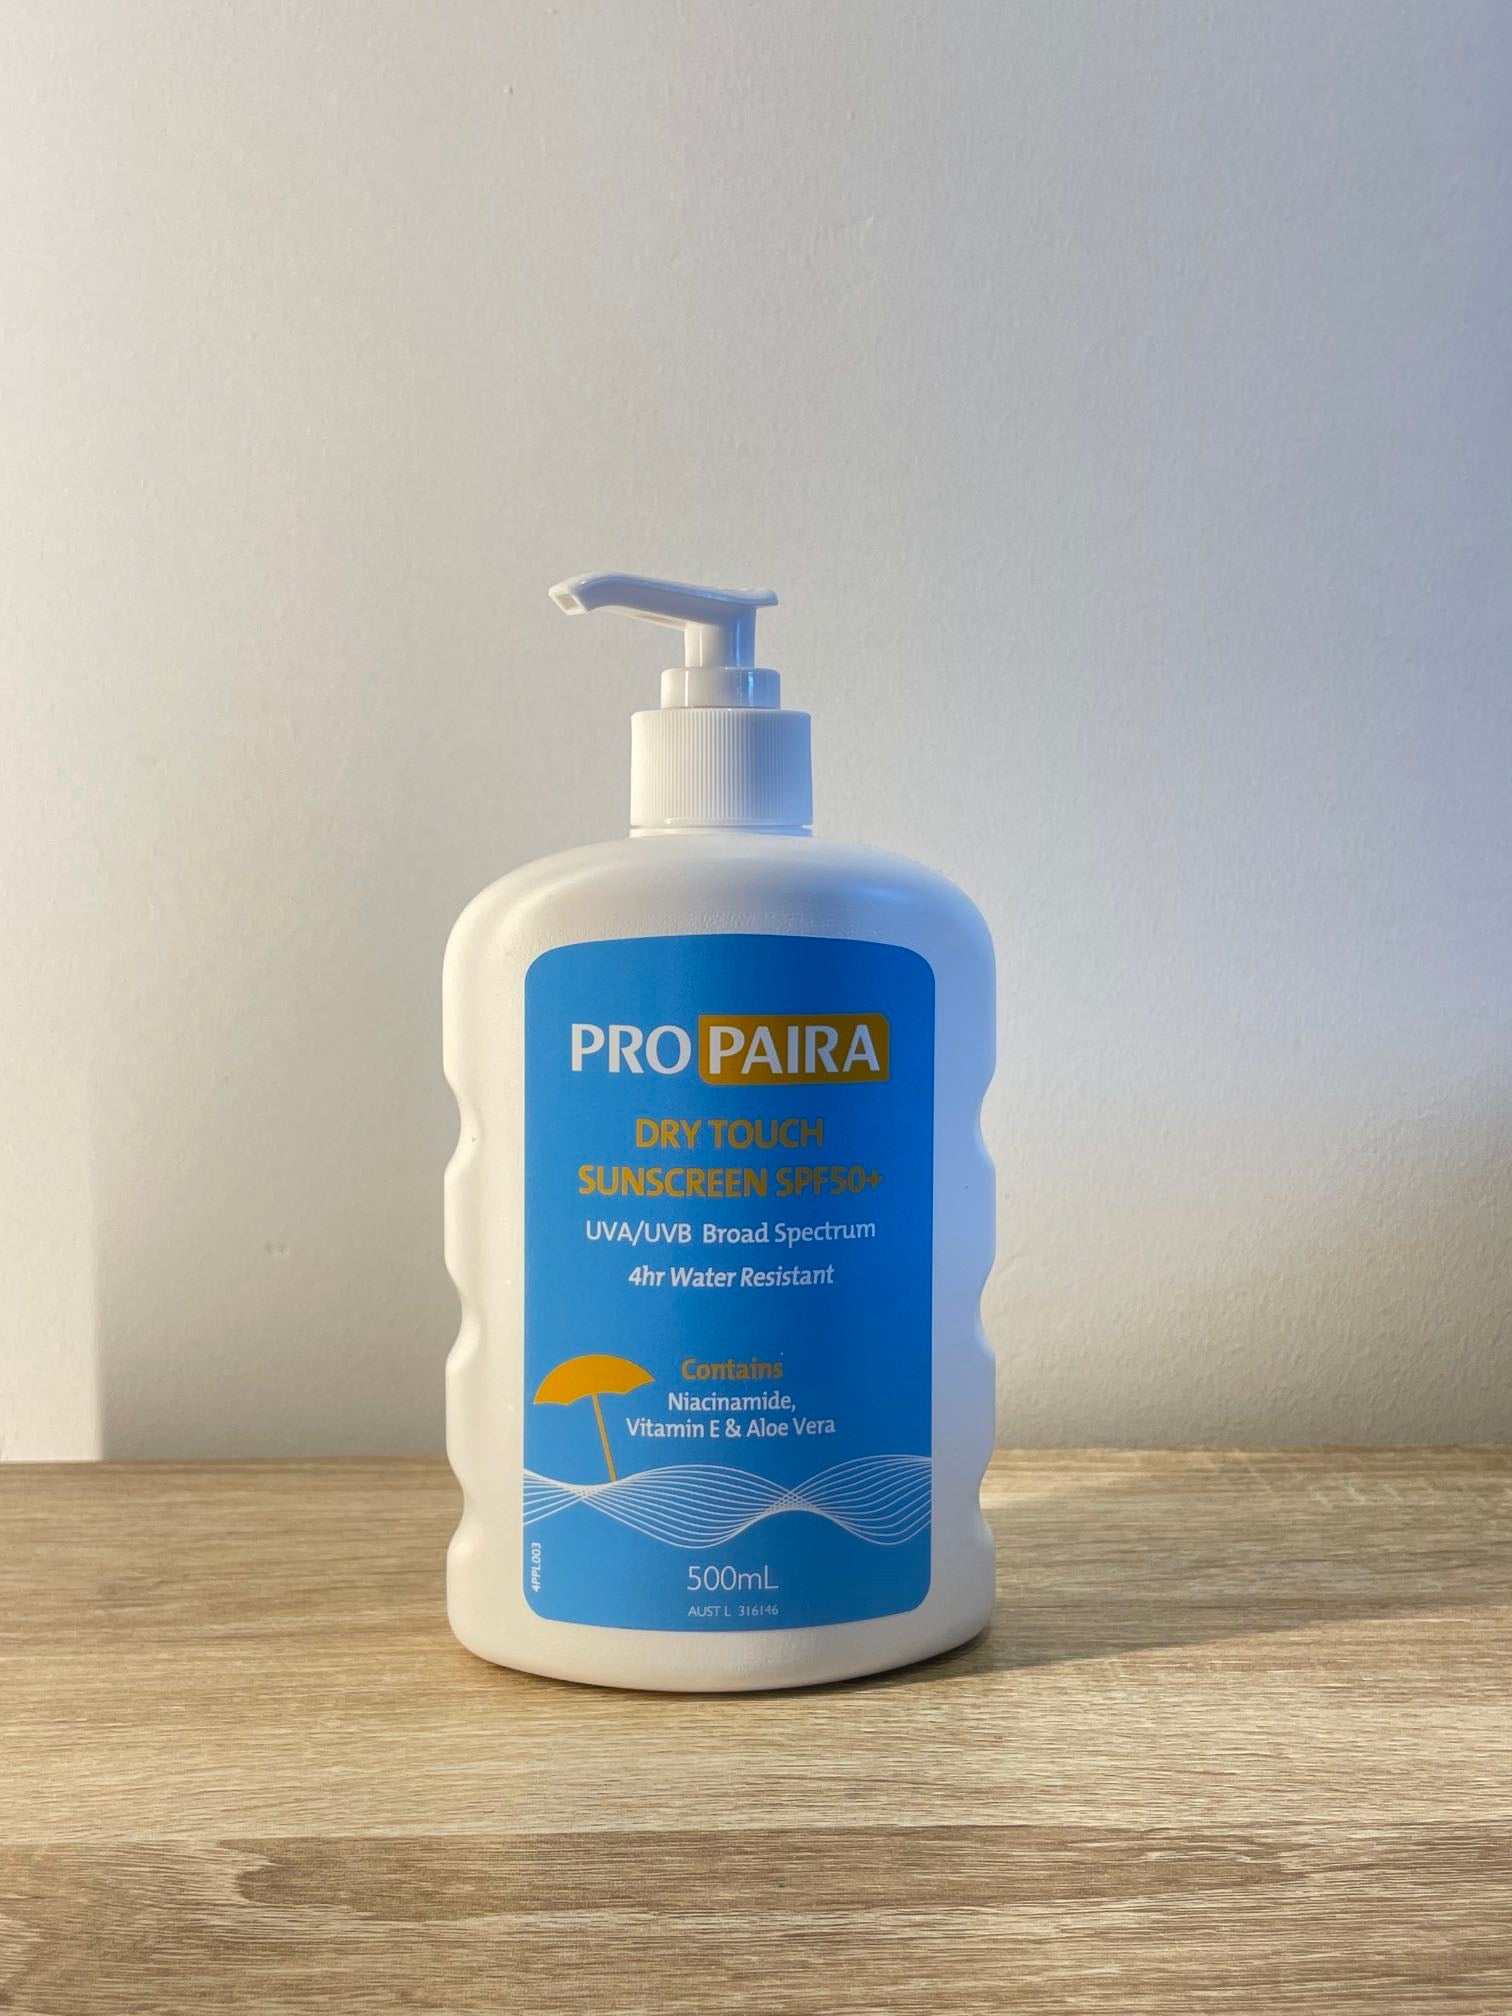 Propaira SPF50+ Water Resistant Dry Touch Body Sunscreen | skintoheart